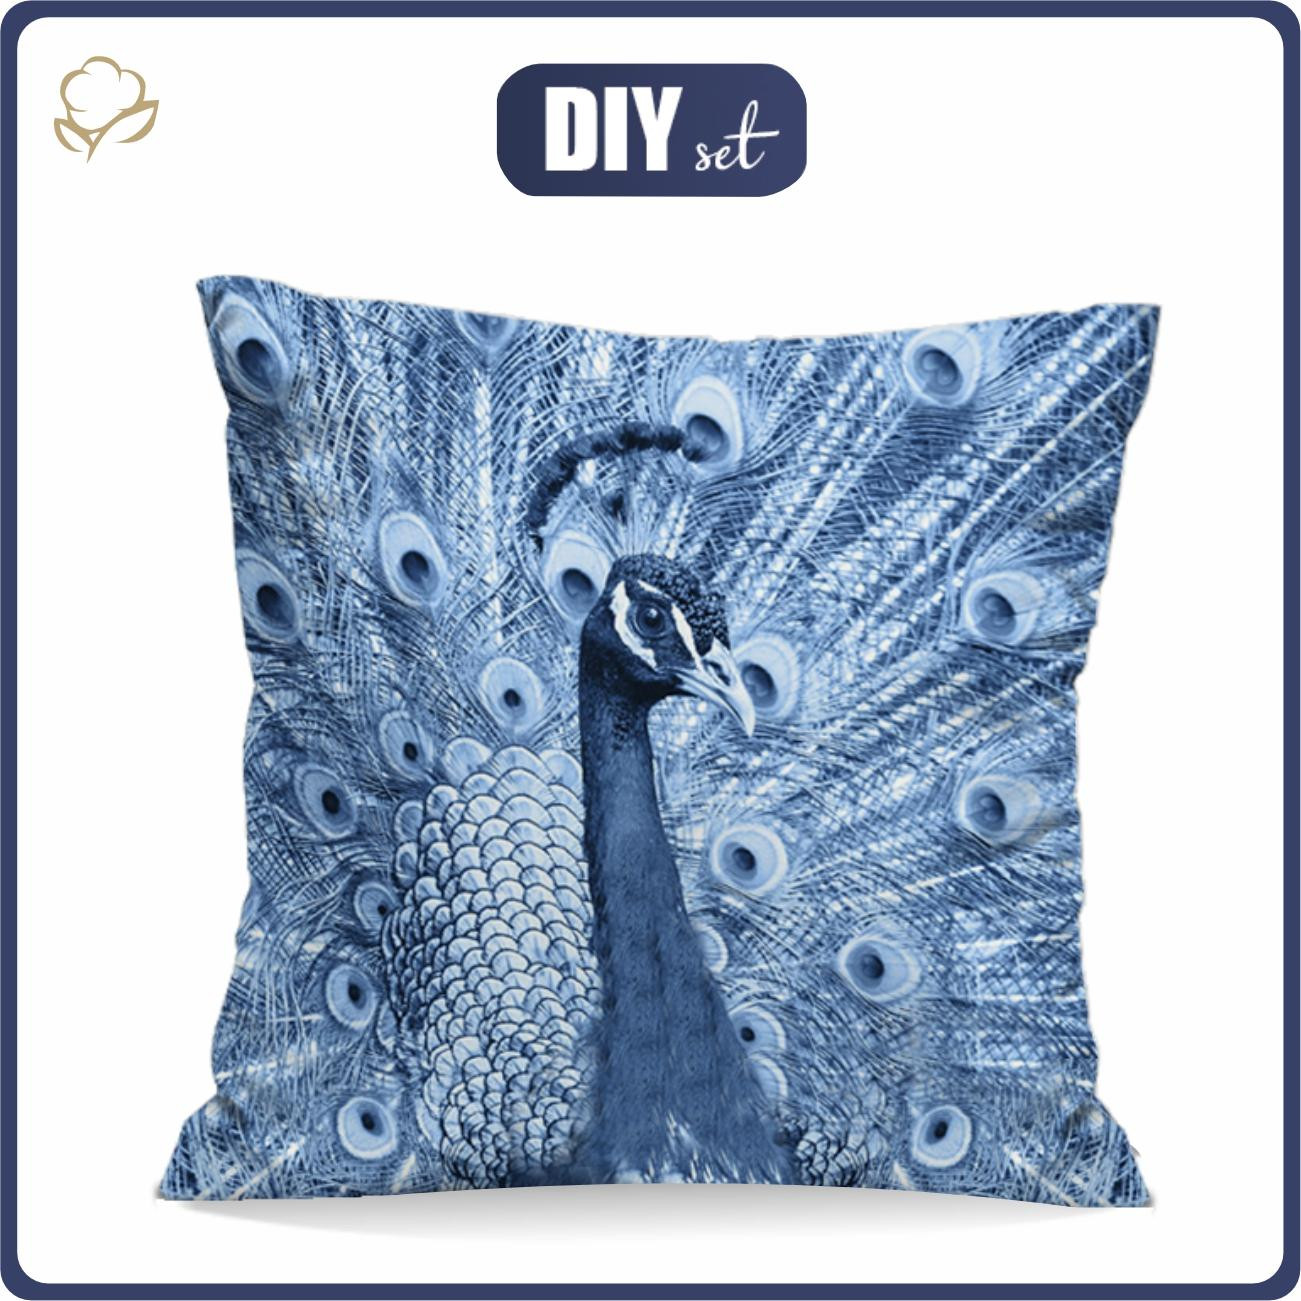 PILLOW 45X45 - PEACOCK (CLASSIC BLUE) - Cotton woven fabric - sewing set